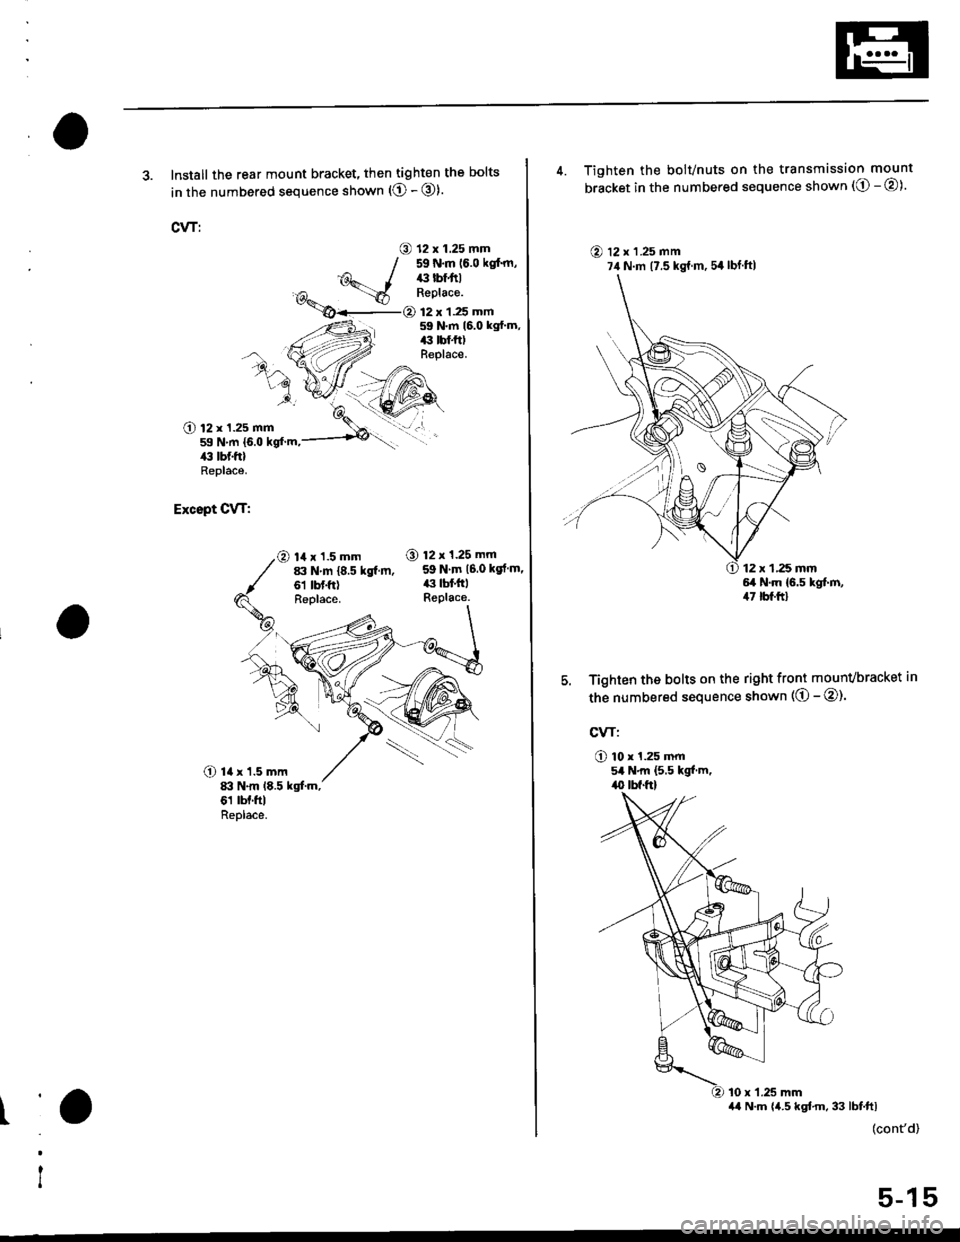 HONDA CIVIC 2000 6.G Service Manual 3. Install the rear mount bracket, then tighten the bolts
in the numbered sequence shown (O - @).
CVT:
O 12 x 1.25 mm59 N.m (6.0 kglm,ilil lbf ftlReplace.
12 x 1.25 mm59 N.m 16.0 kgfm,|:r tbf.tt)Rep